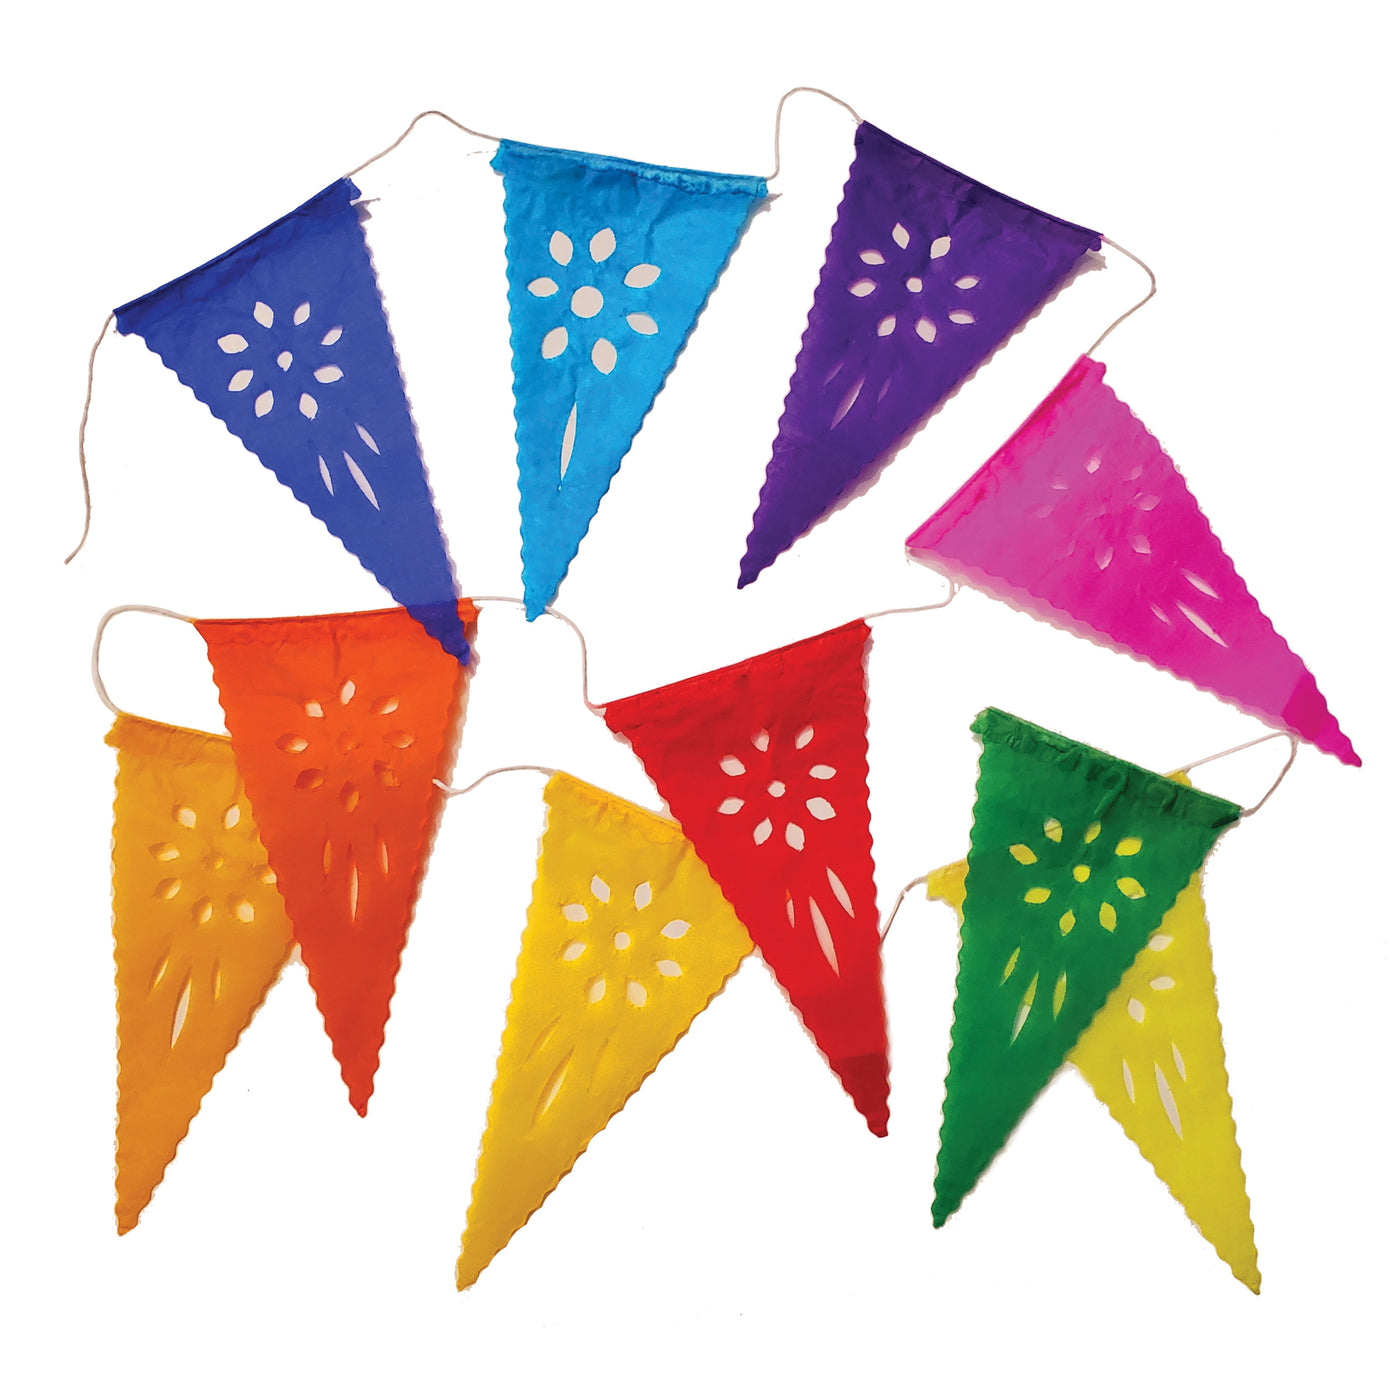 A papel picado banner of various colors and various floral designs. Papel picado , or perforated paper, is a traditional Mexican decorative craft made by cutting elaborate designs into sheets of tissue paper.